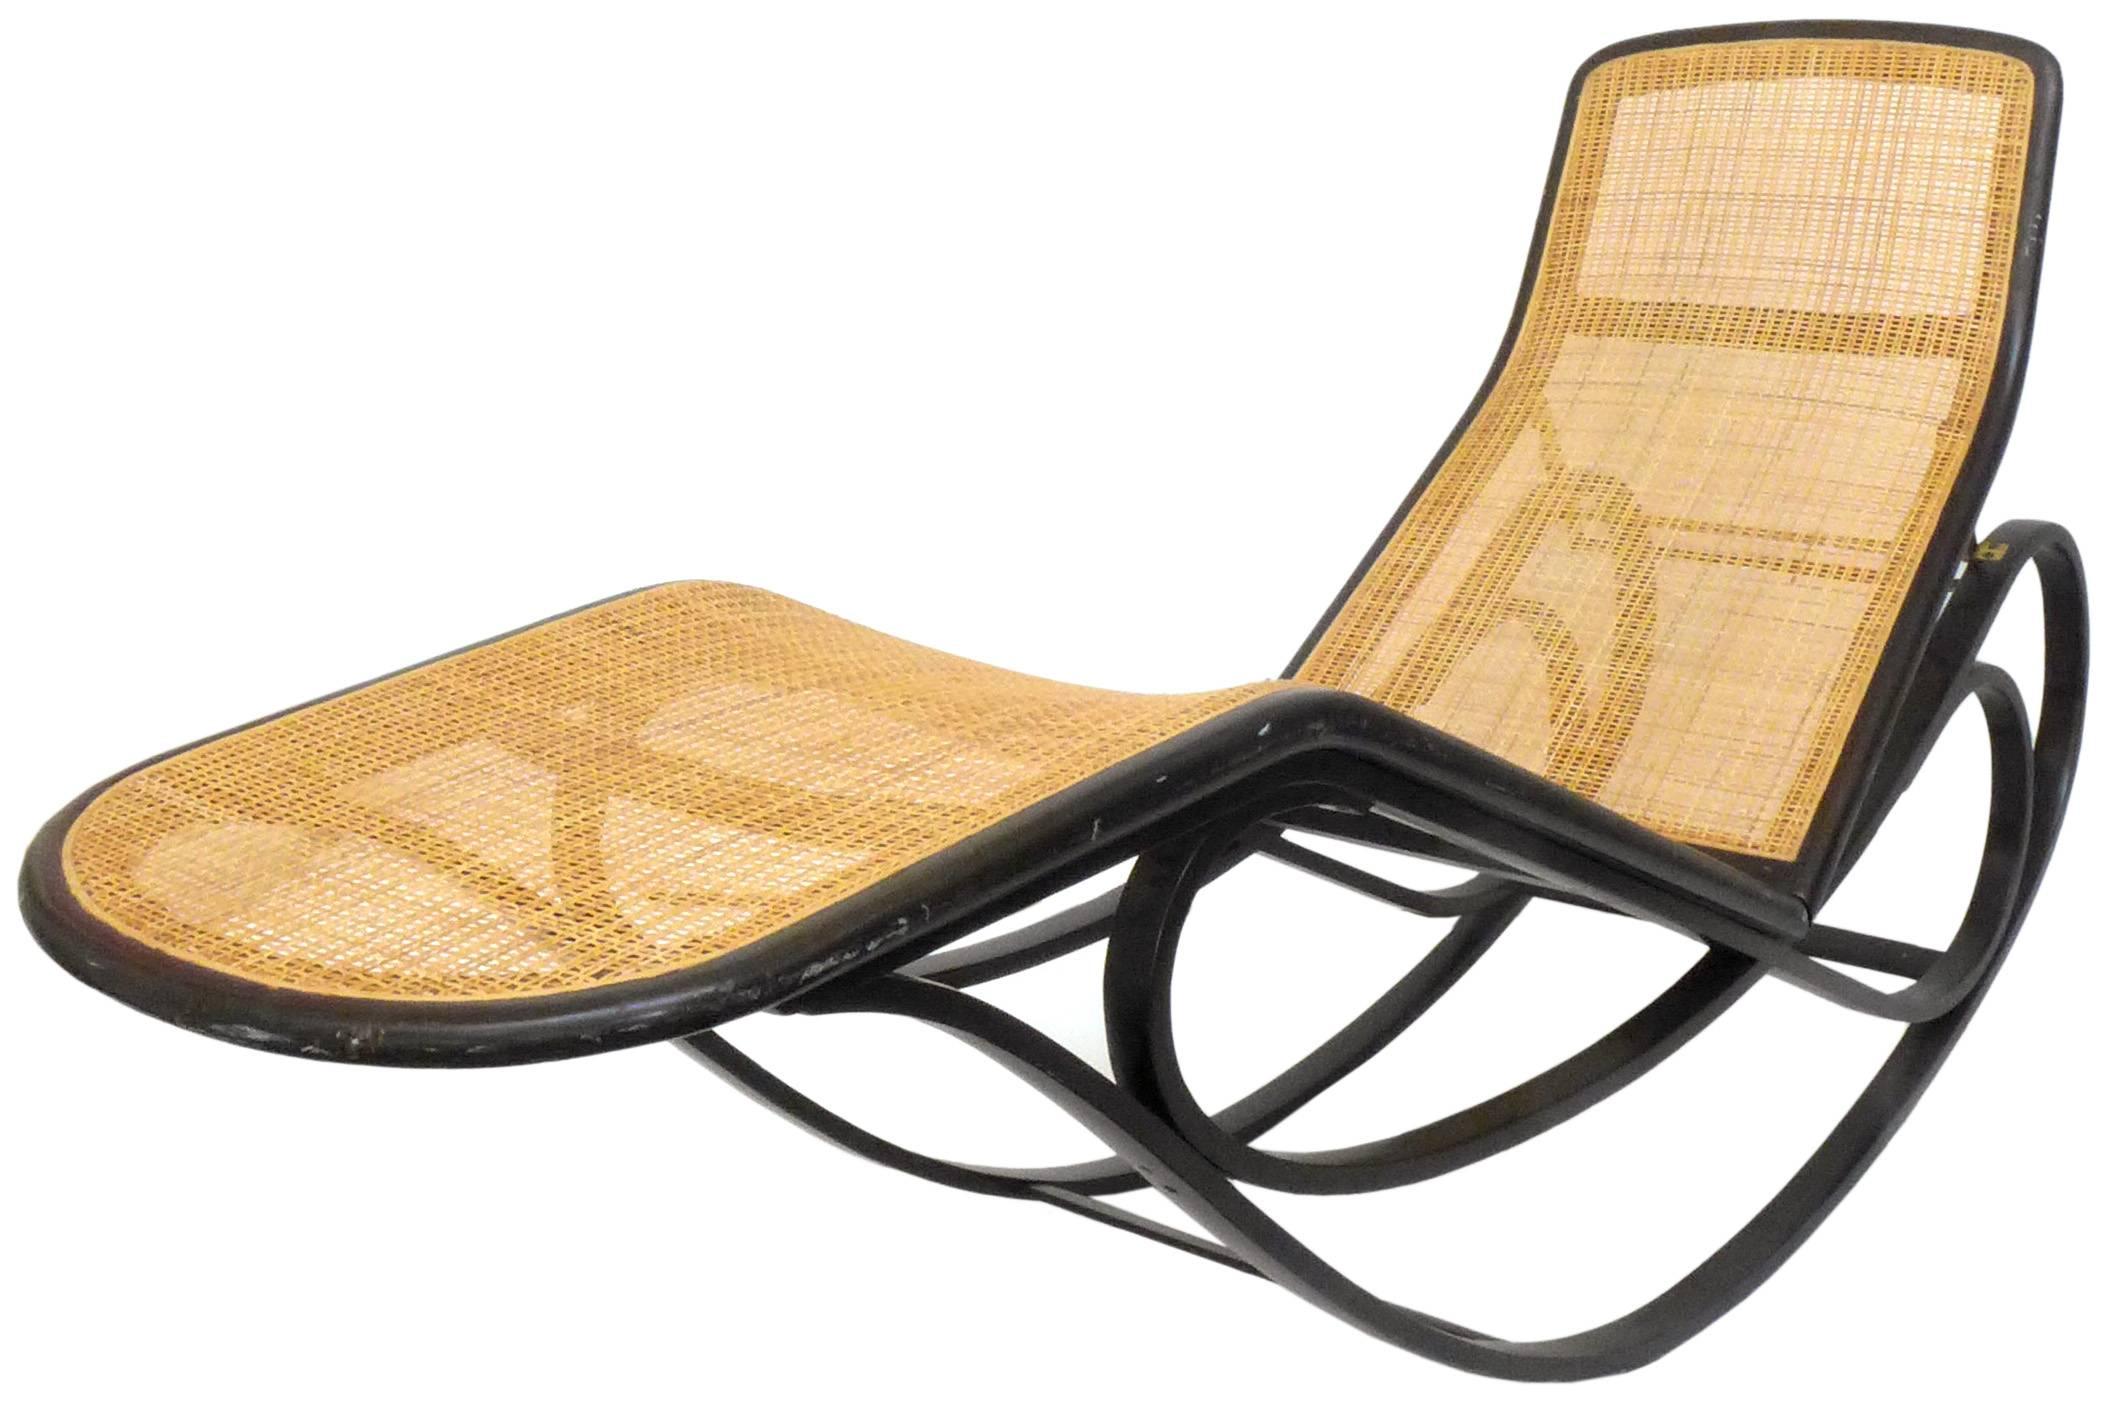 A beautiful and rare rocking chaise lounge by Edward Wormley for Dunbar. A highly-desirable icon of Mid-Century American furniture, a Thonet-inspired piece in bent ash, woven cane, and brass. Back-height is adjustable to three positions. In great,